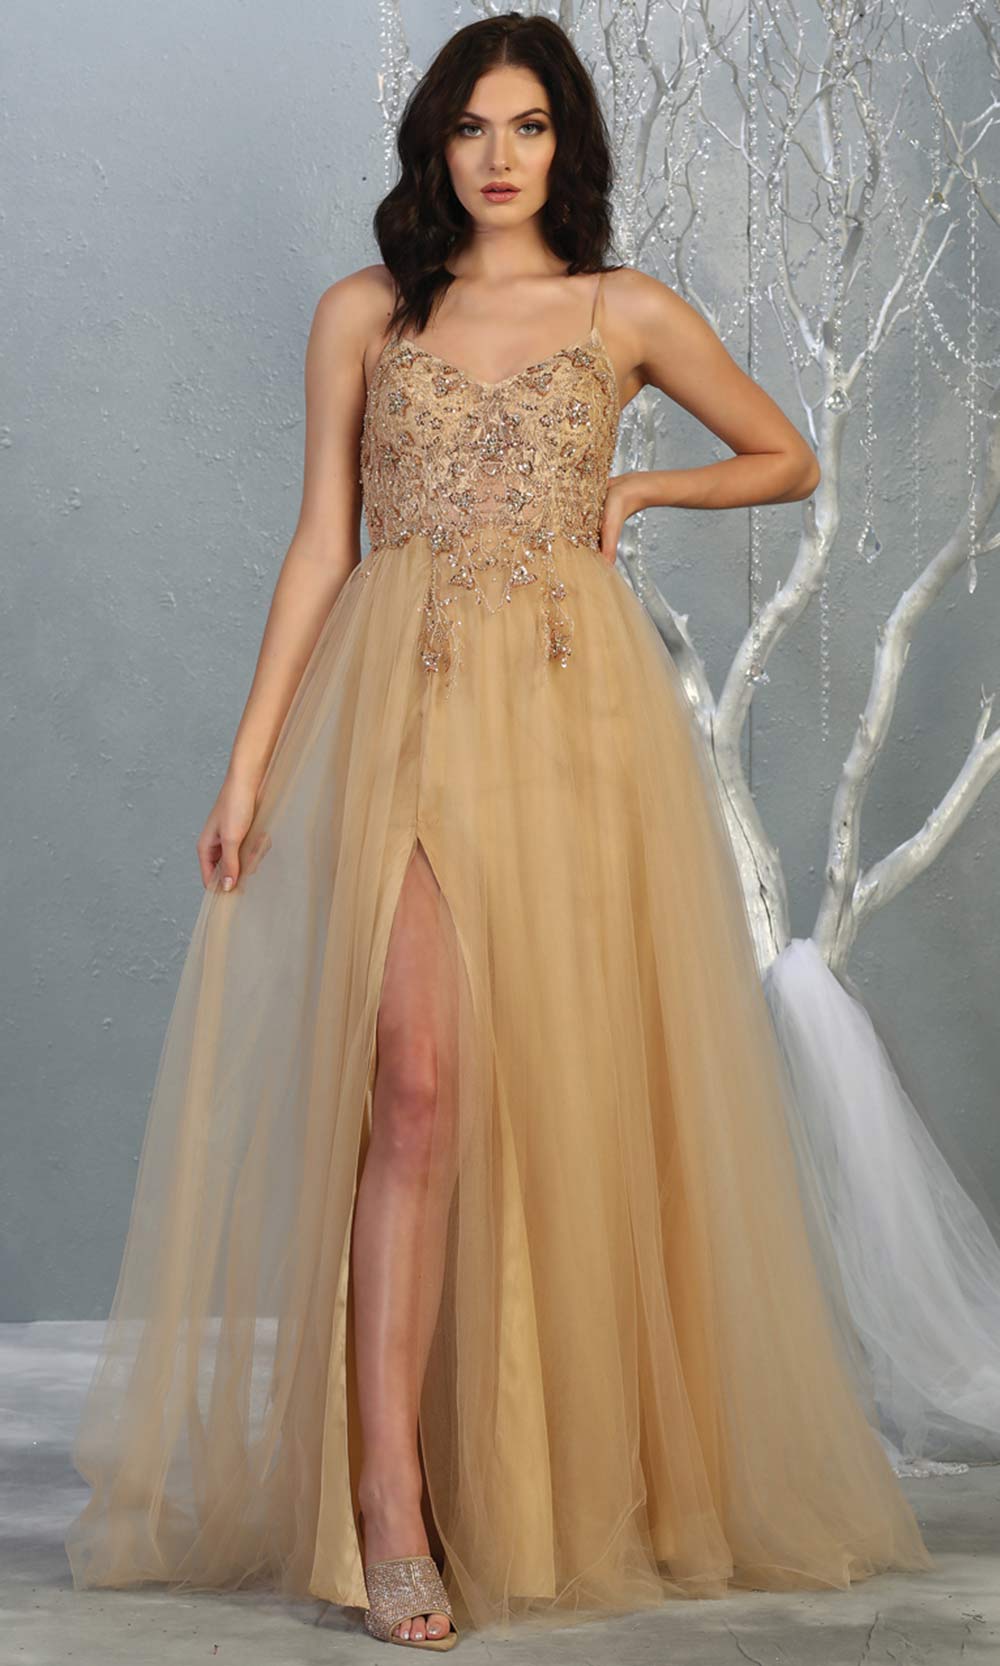 Mayqueen MQ1778 long champagne scoop neck flowy tulle skirt dress with high slit. Perfect for prom, engagement dress, e-shoot dress, formal wedding guest dress, debut, quinceanera, sweet 16, gala. Plus sizes avail in this light gold semi ballgown.jpg